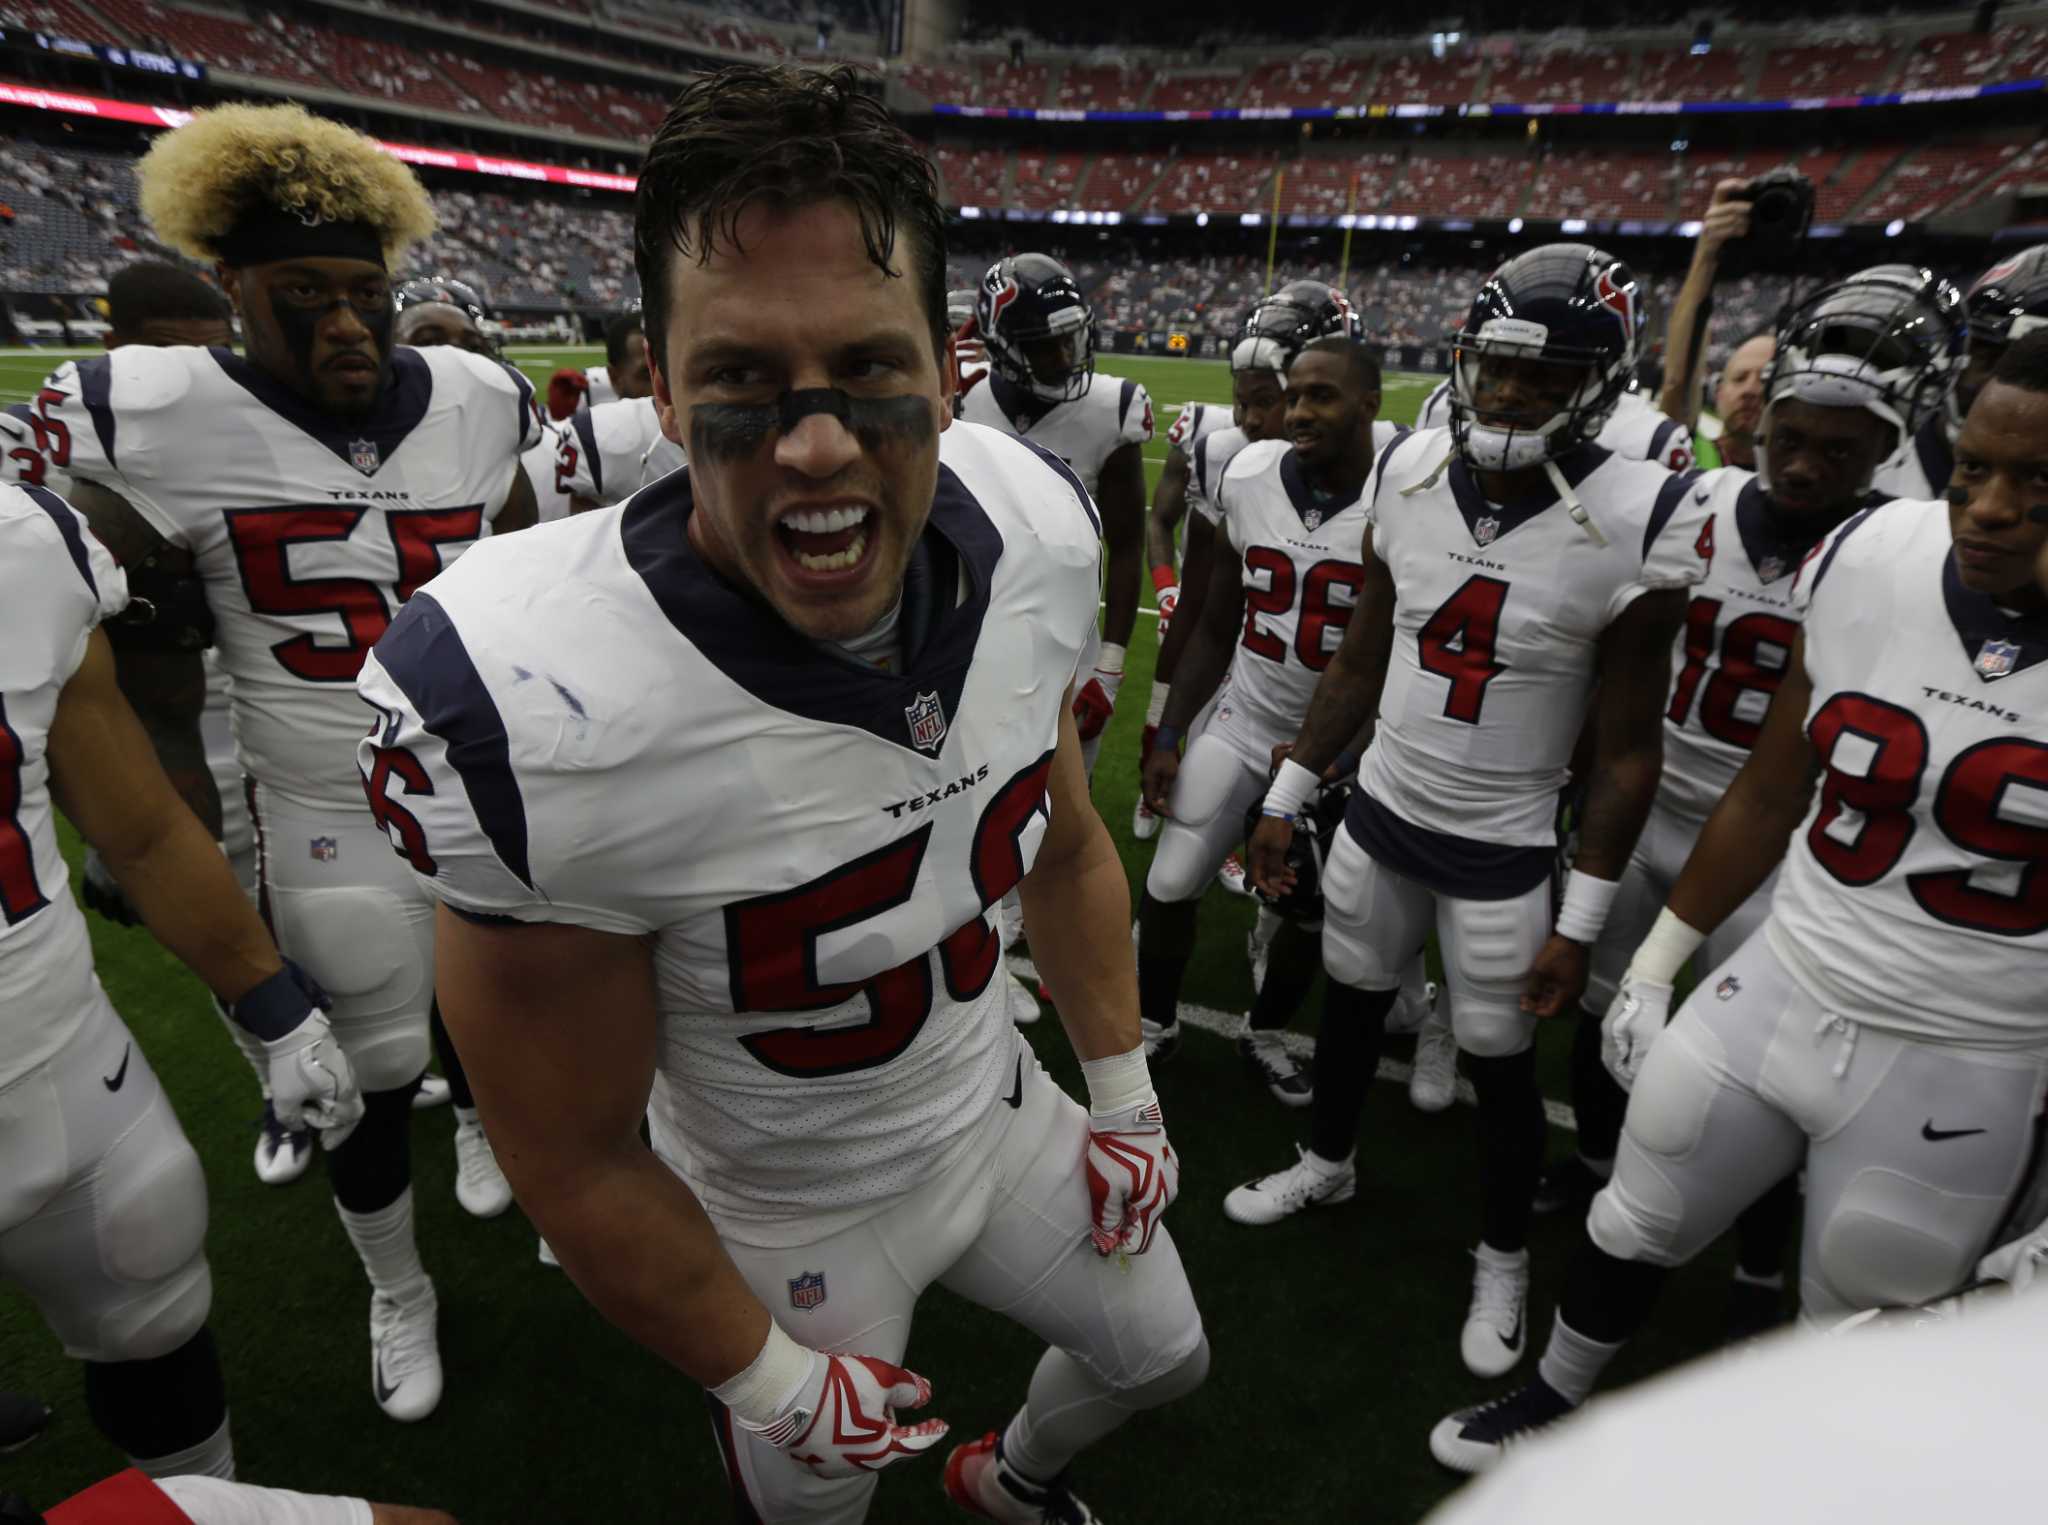 NFL: Texans LB Brian Cushing suspended 10 games by NFL